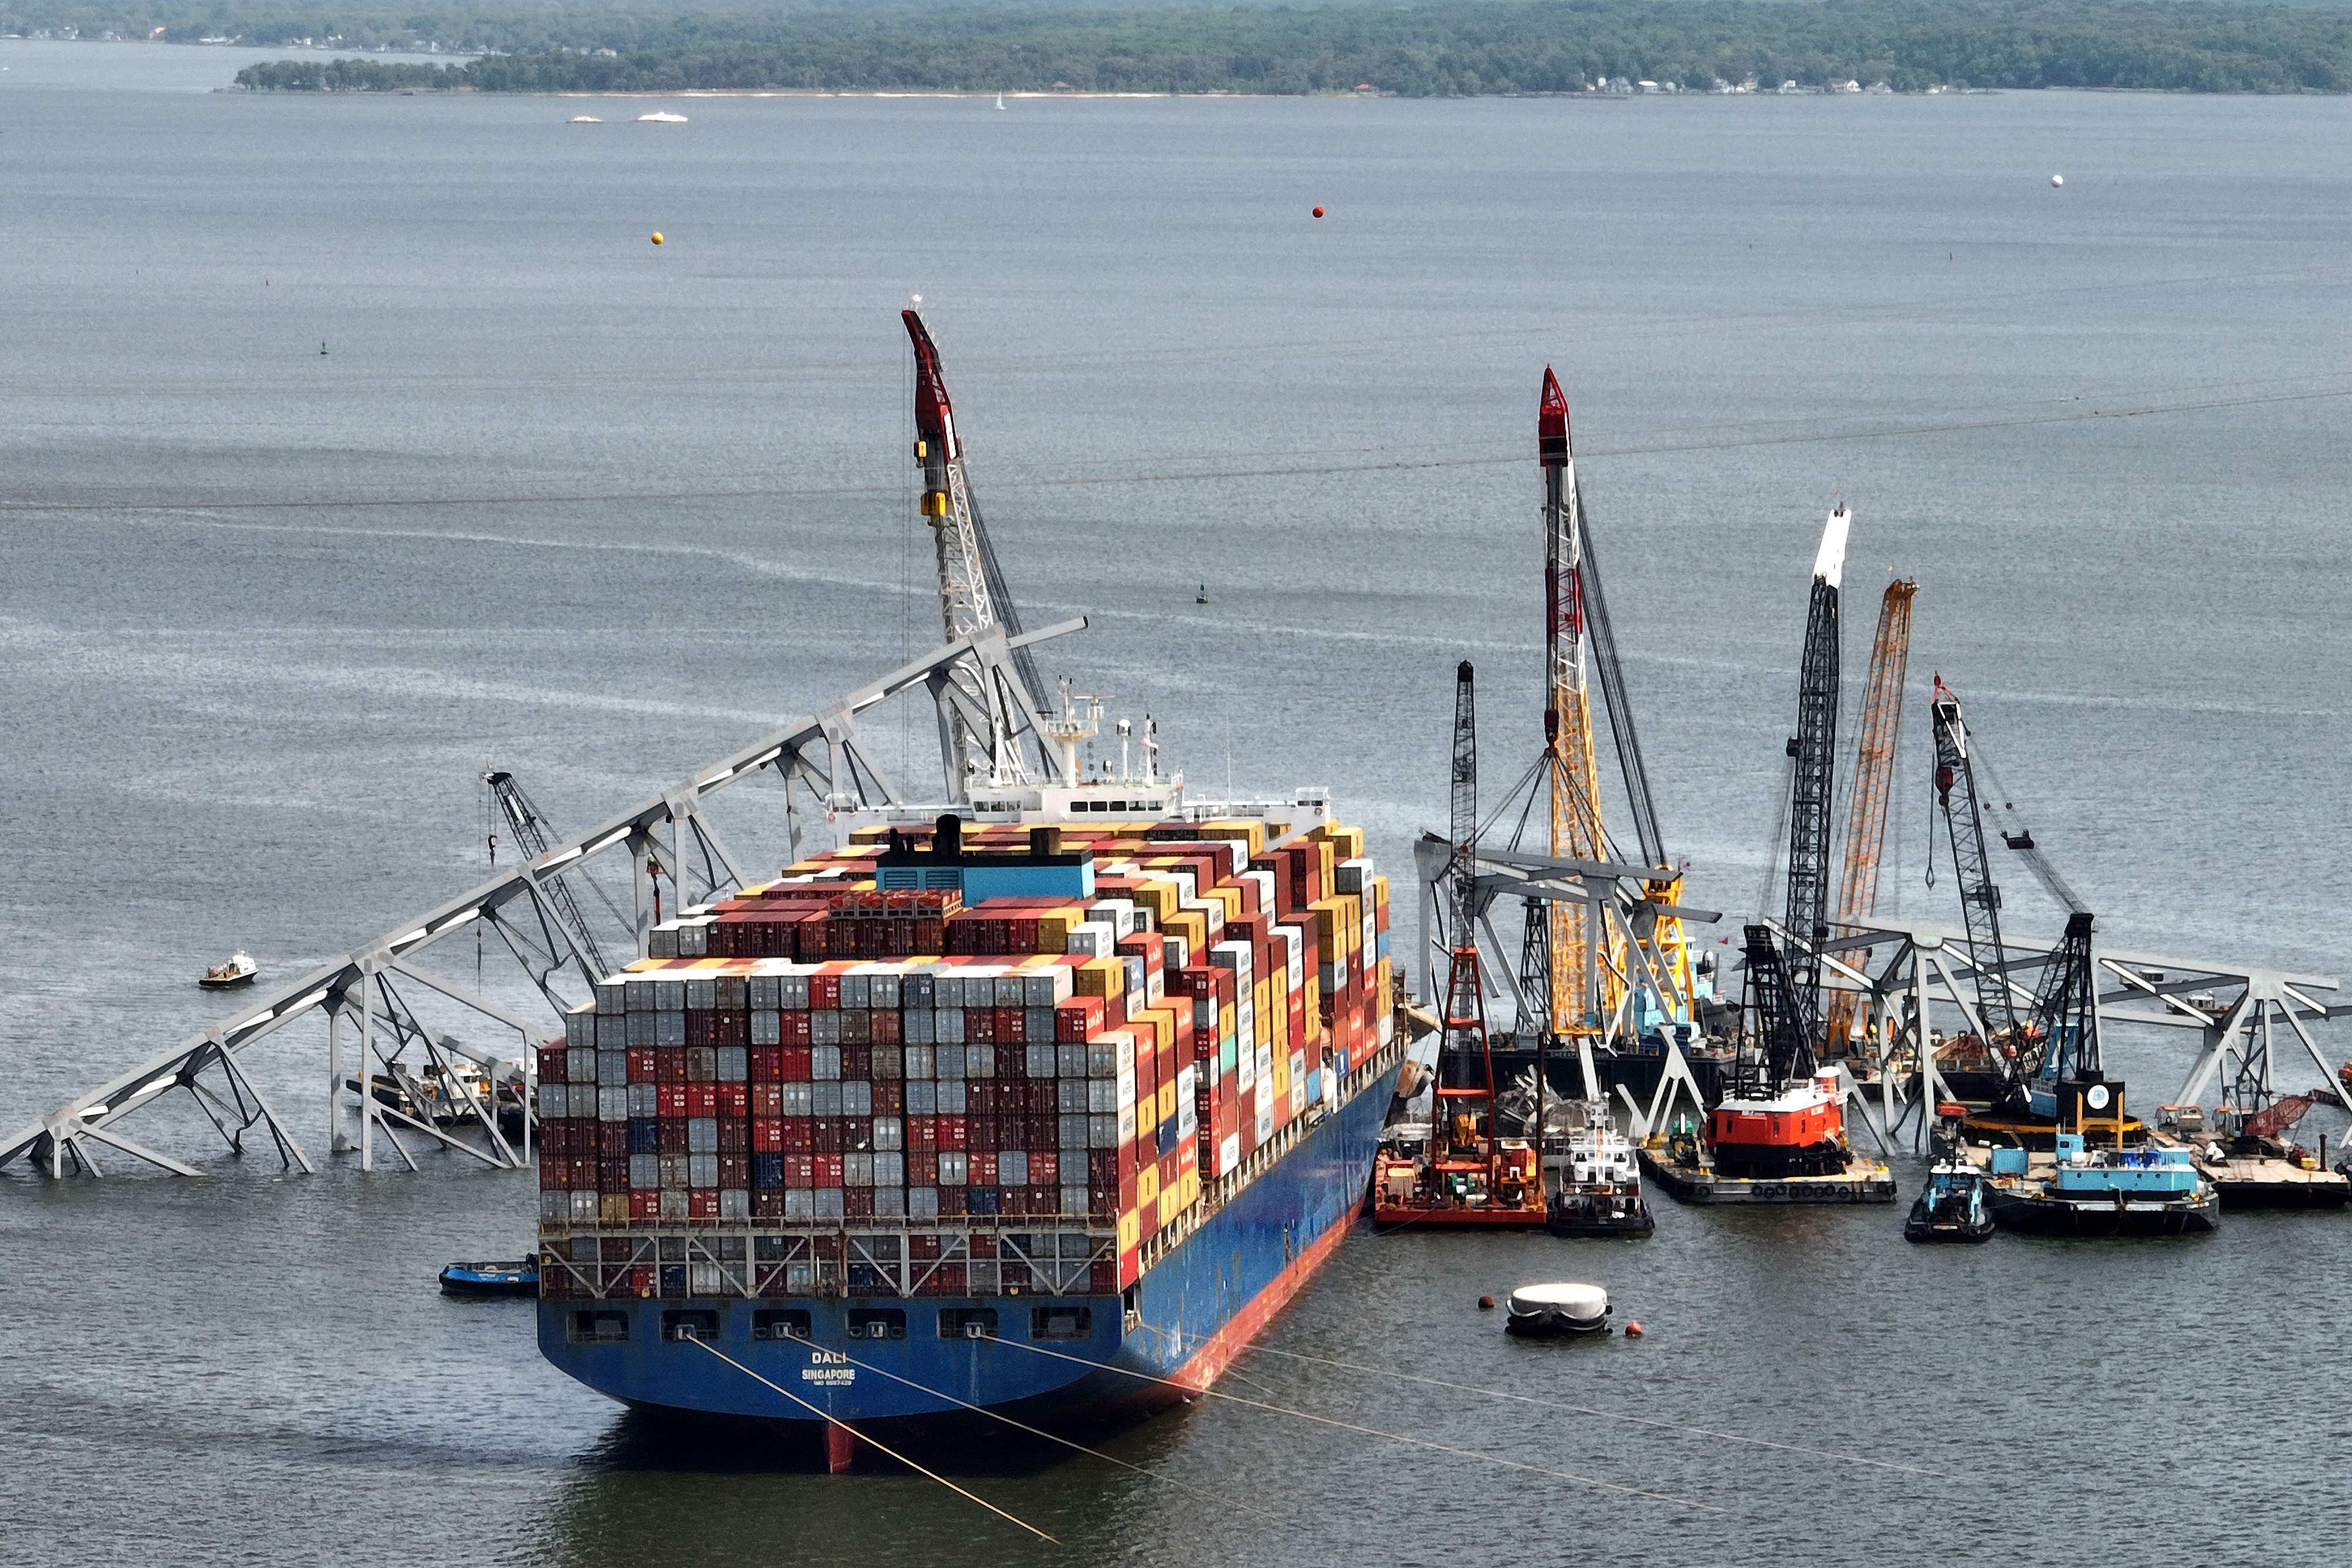 Salvage crews continue to remove wreckage from the Dali, weeks after the cargo ship collided with the Francis Scott Key Bridge. The crew of 21 is still stranded on the ship. Photo: AFP